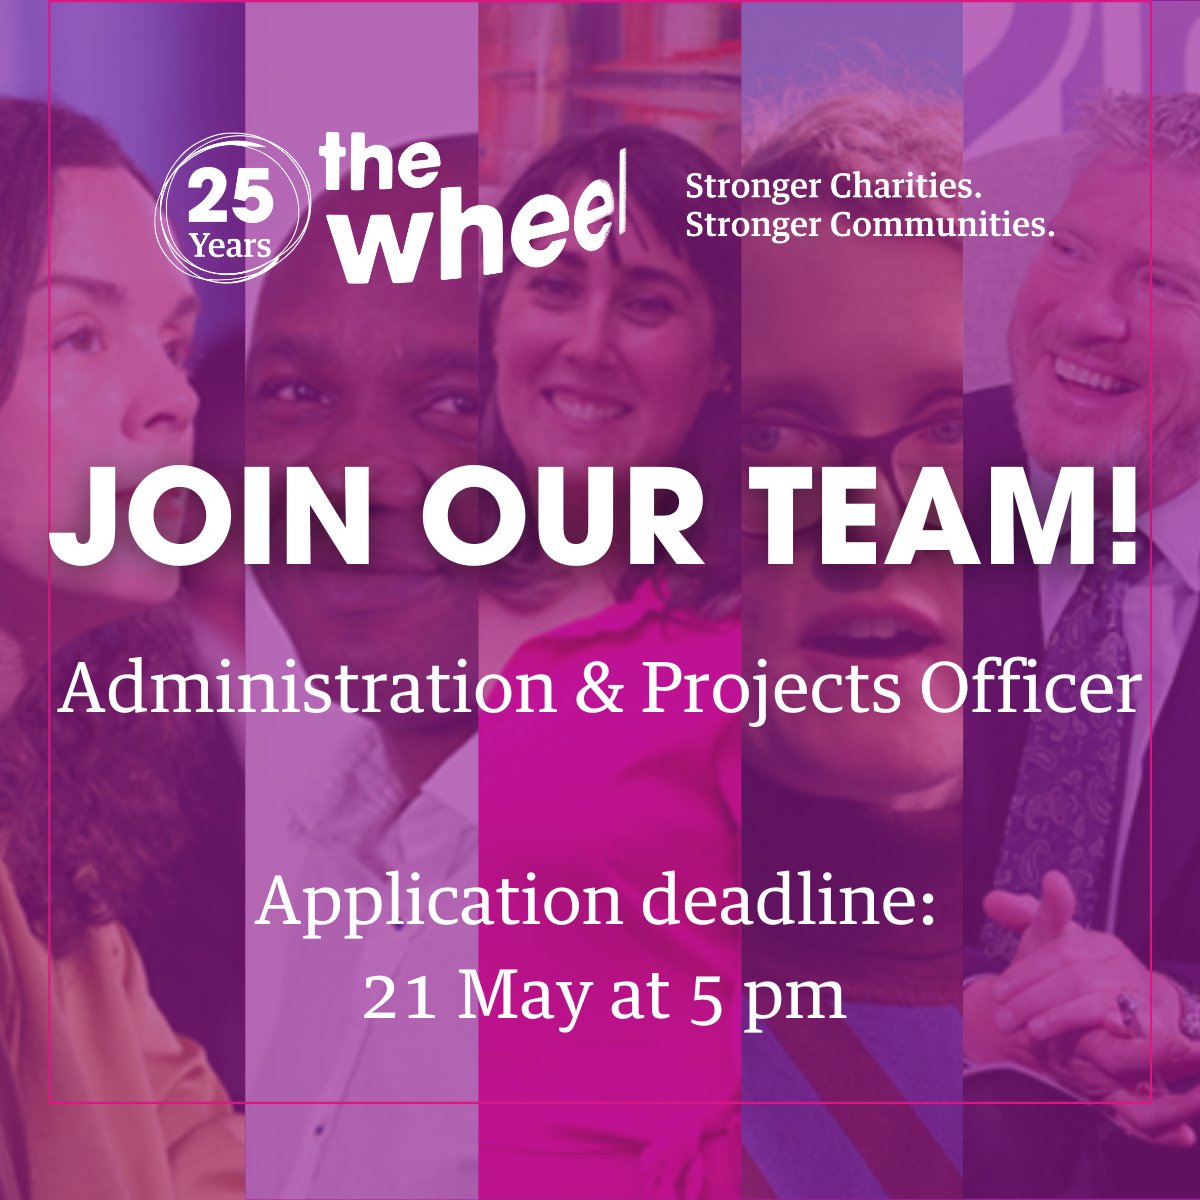 Do you want a meaningful career in an organisation where you can make a positive social impact? We are recruiting an Administration & Projects Officer. Applications close on 21 May at 5pm. wheel.ie/jobs/administr… #jobfairy #DublinJobs #Hiring #IrelandJobs